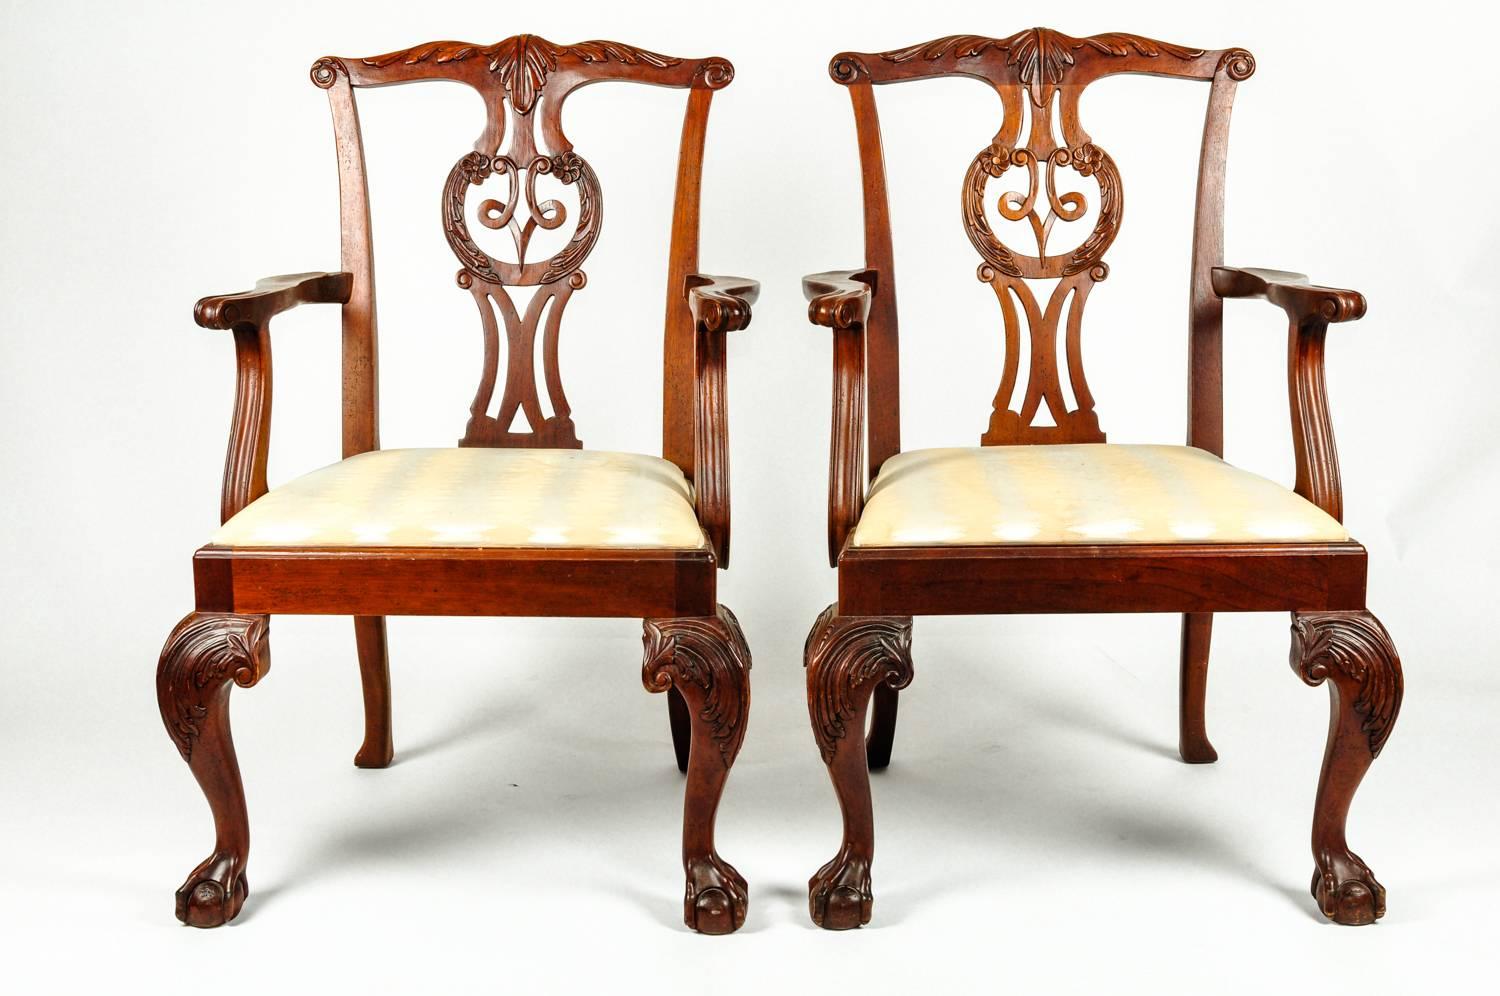 Vintage set of eight Georgian style solid mahogany dining room chairs by Baker. This fine set consists of two-arm and six side chairs each having a finely carved ball and claw foot leading to a cabriole leg. Each one is in excellent condition, new